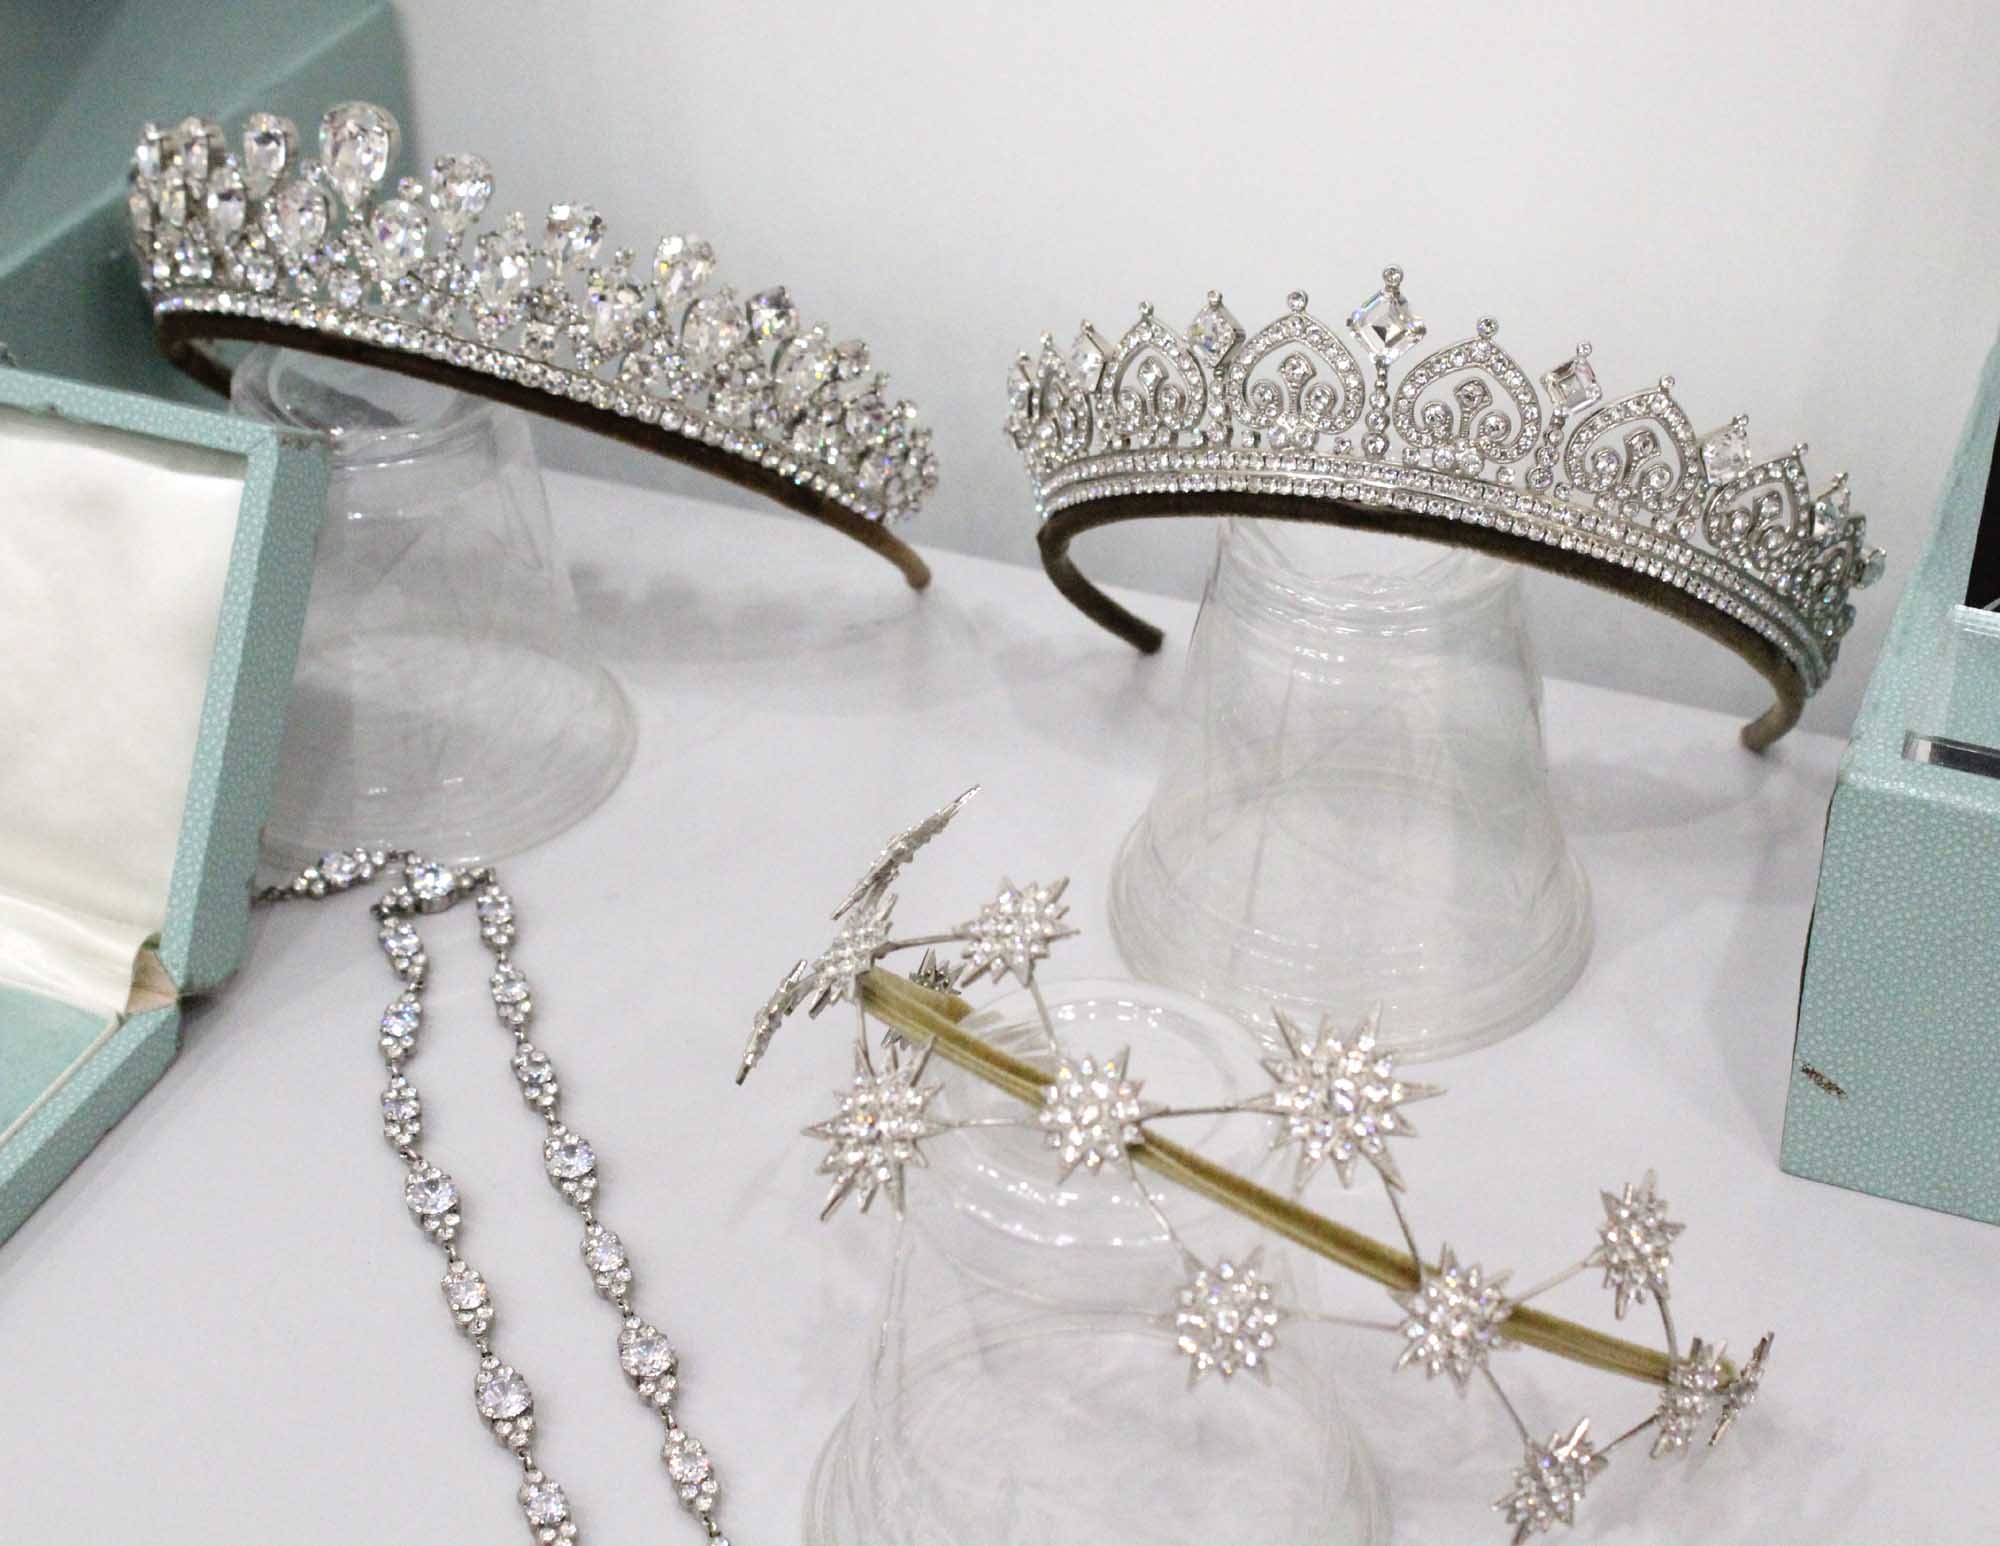 Tiaras at V&A pearl show  Jewellery exhibition, Amazing jewelry